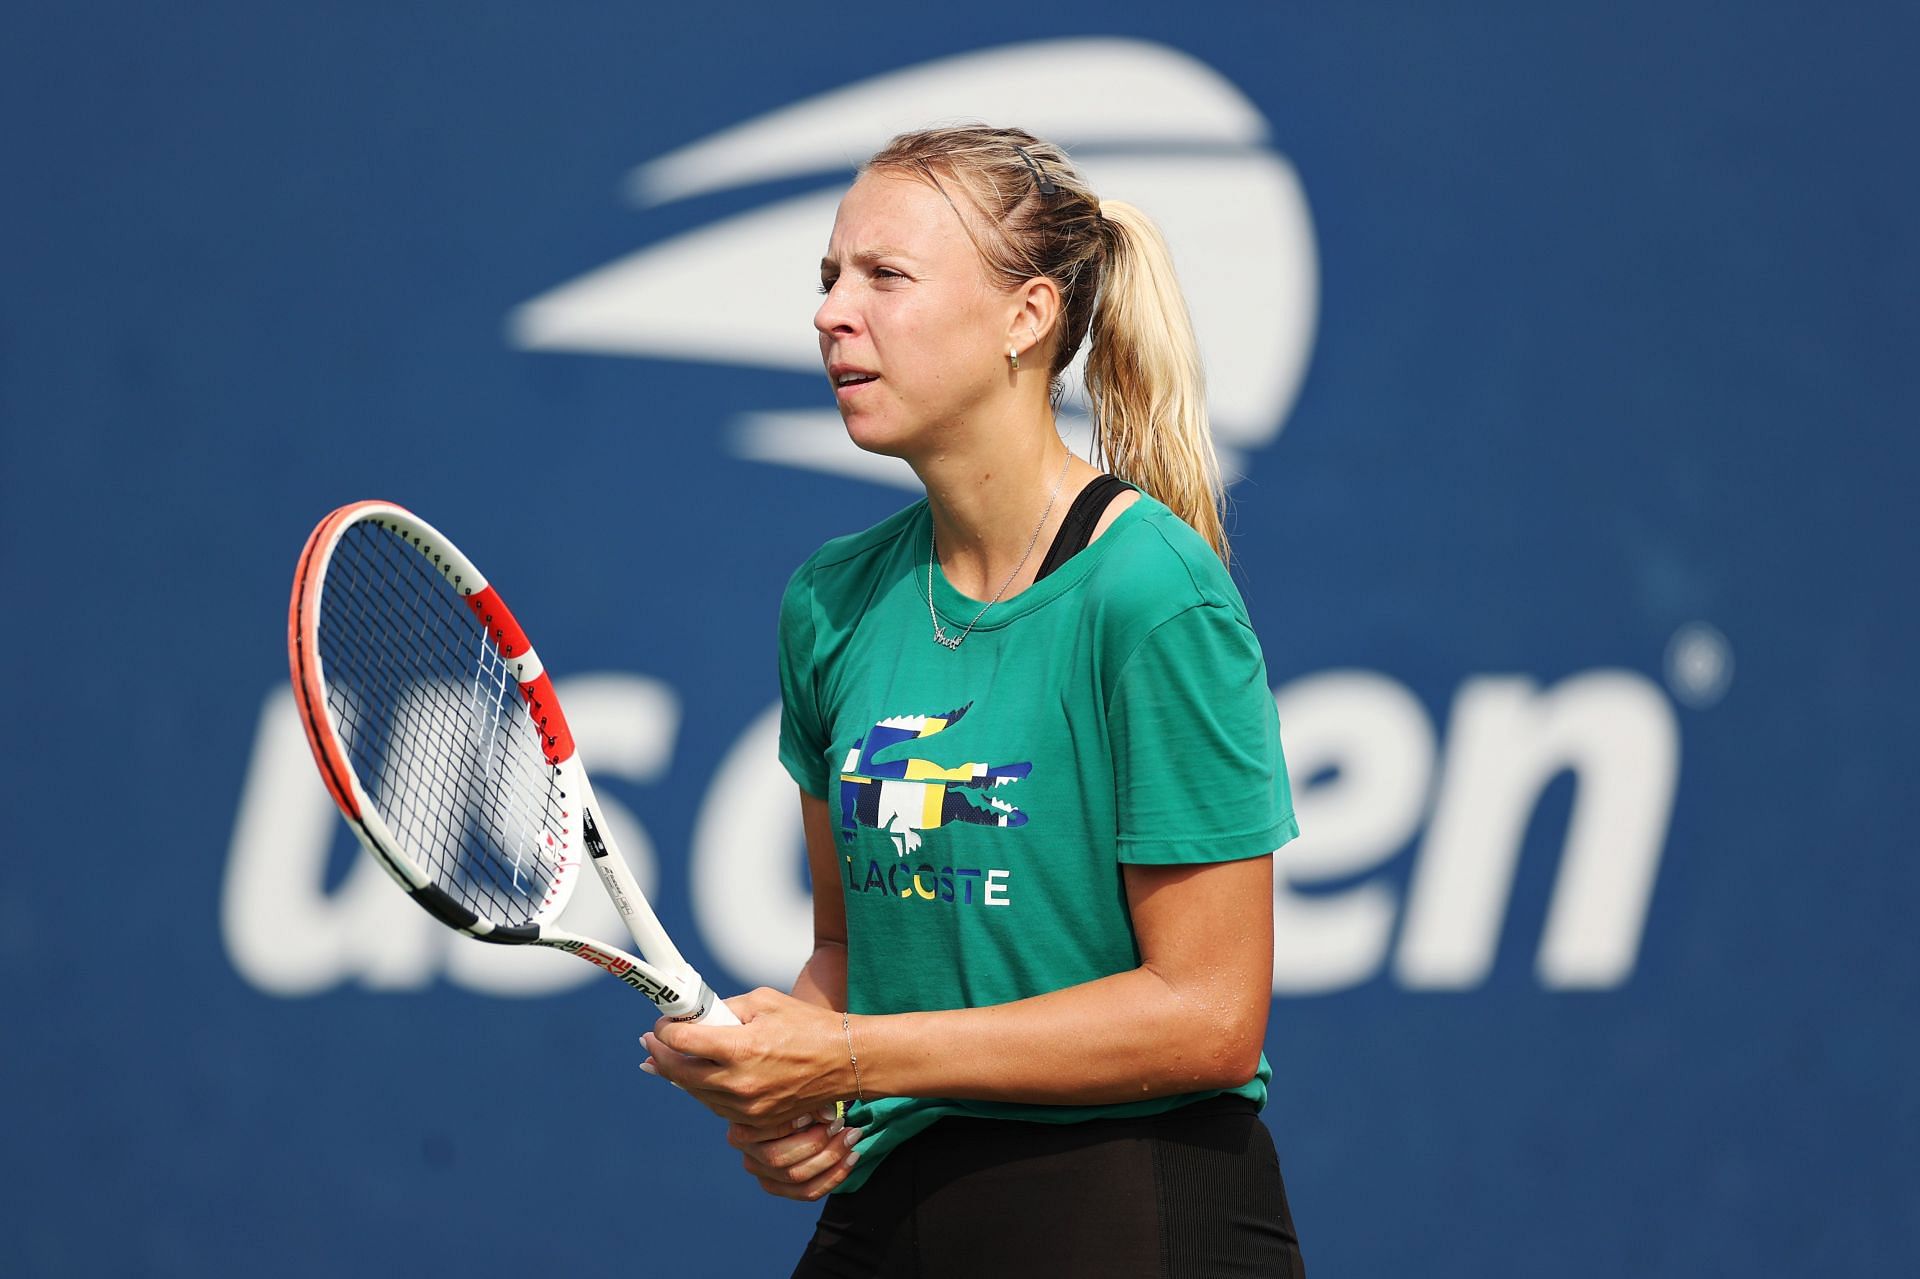 Anett Kontaveit will look to win her second title of the season